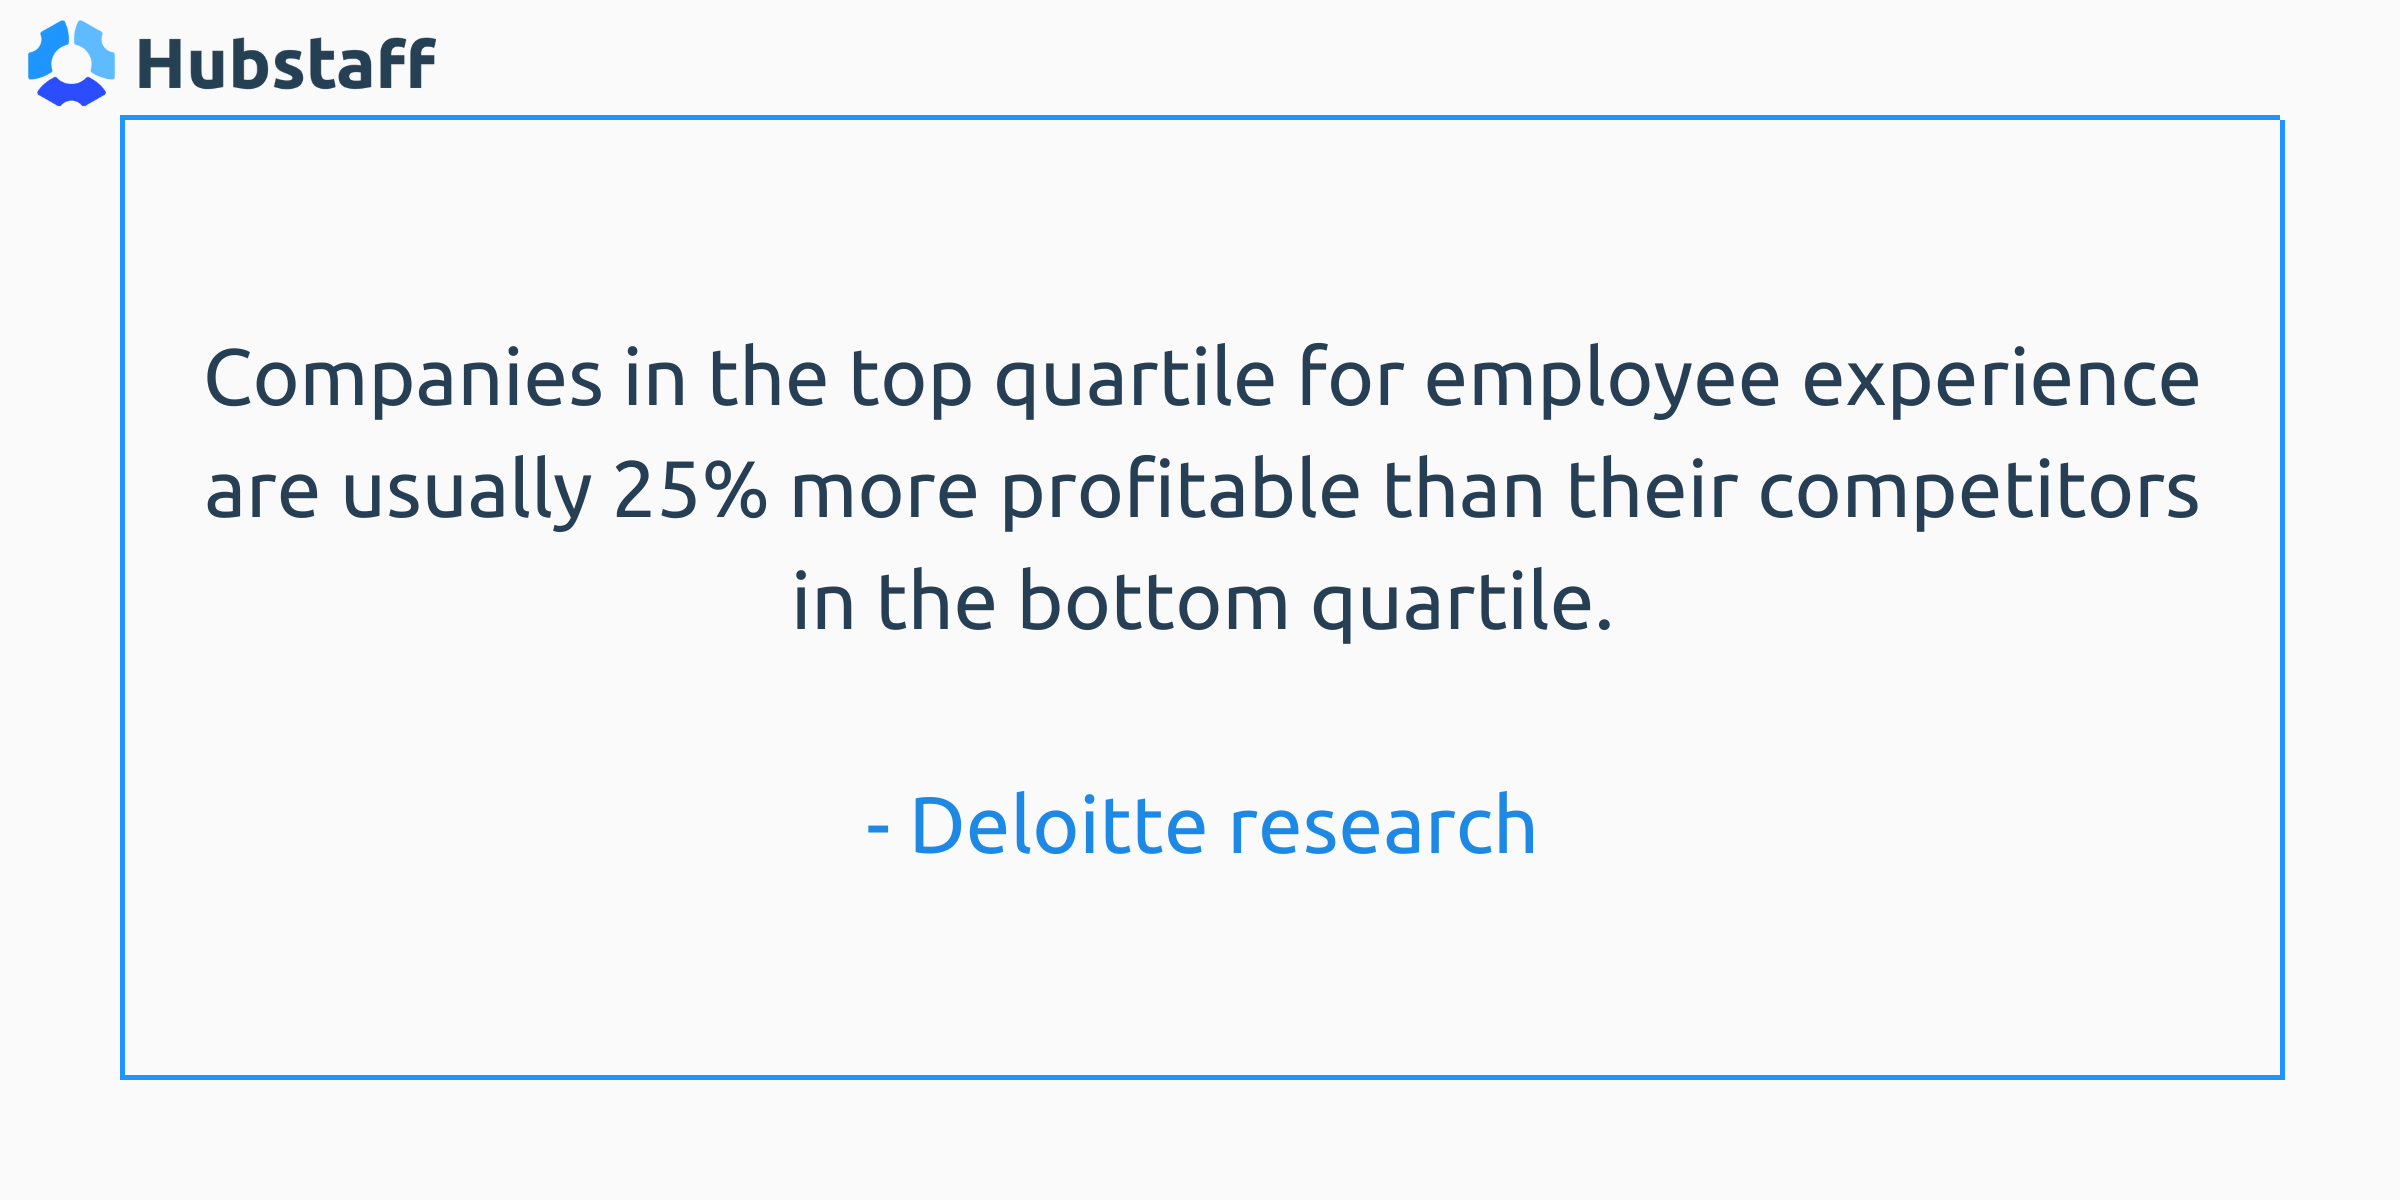 “Companies in the top quartile for employee experience are usually 25% more profitable than their competitors in the bottom quartile.” - Deloitte research